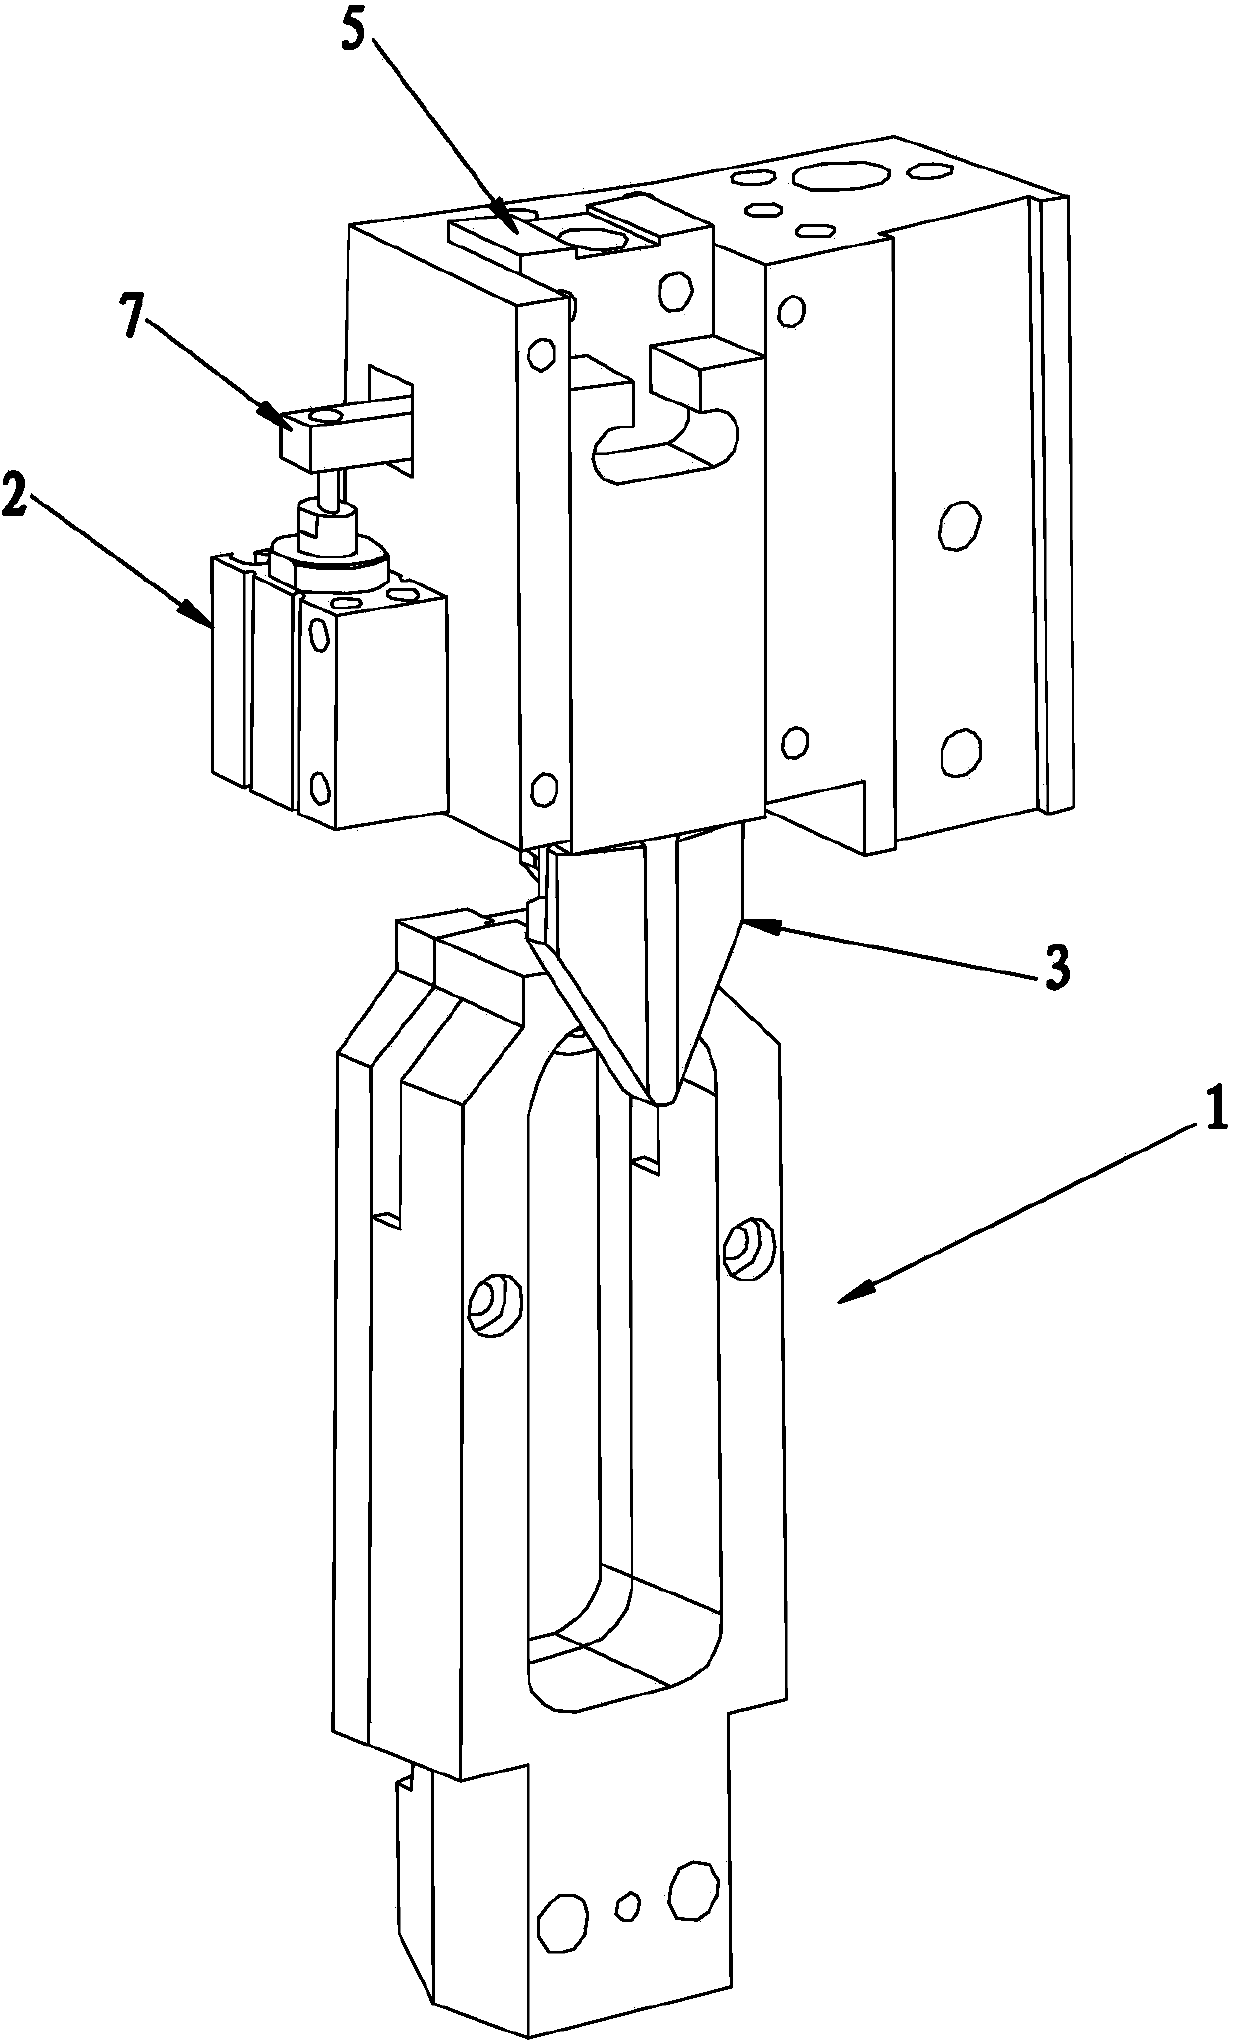 Strap splitting device arranged on zipper machine and used for zipper head installation